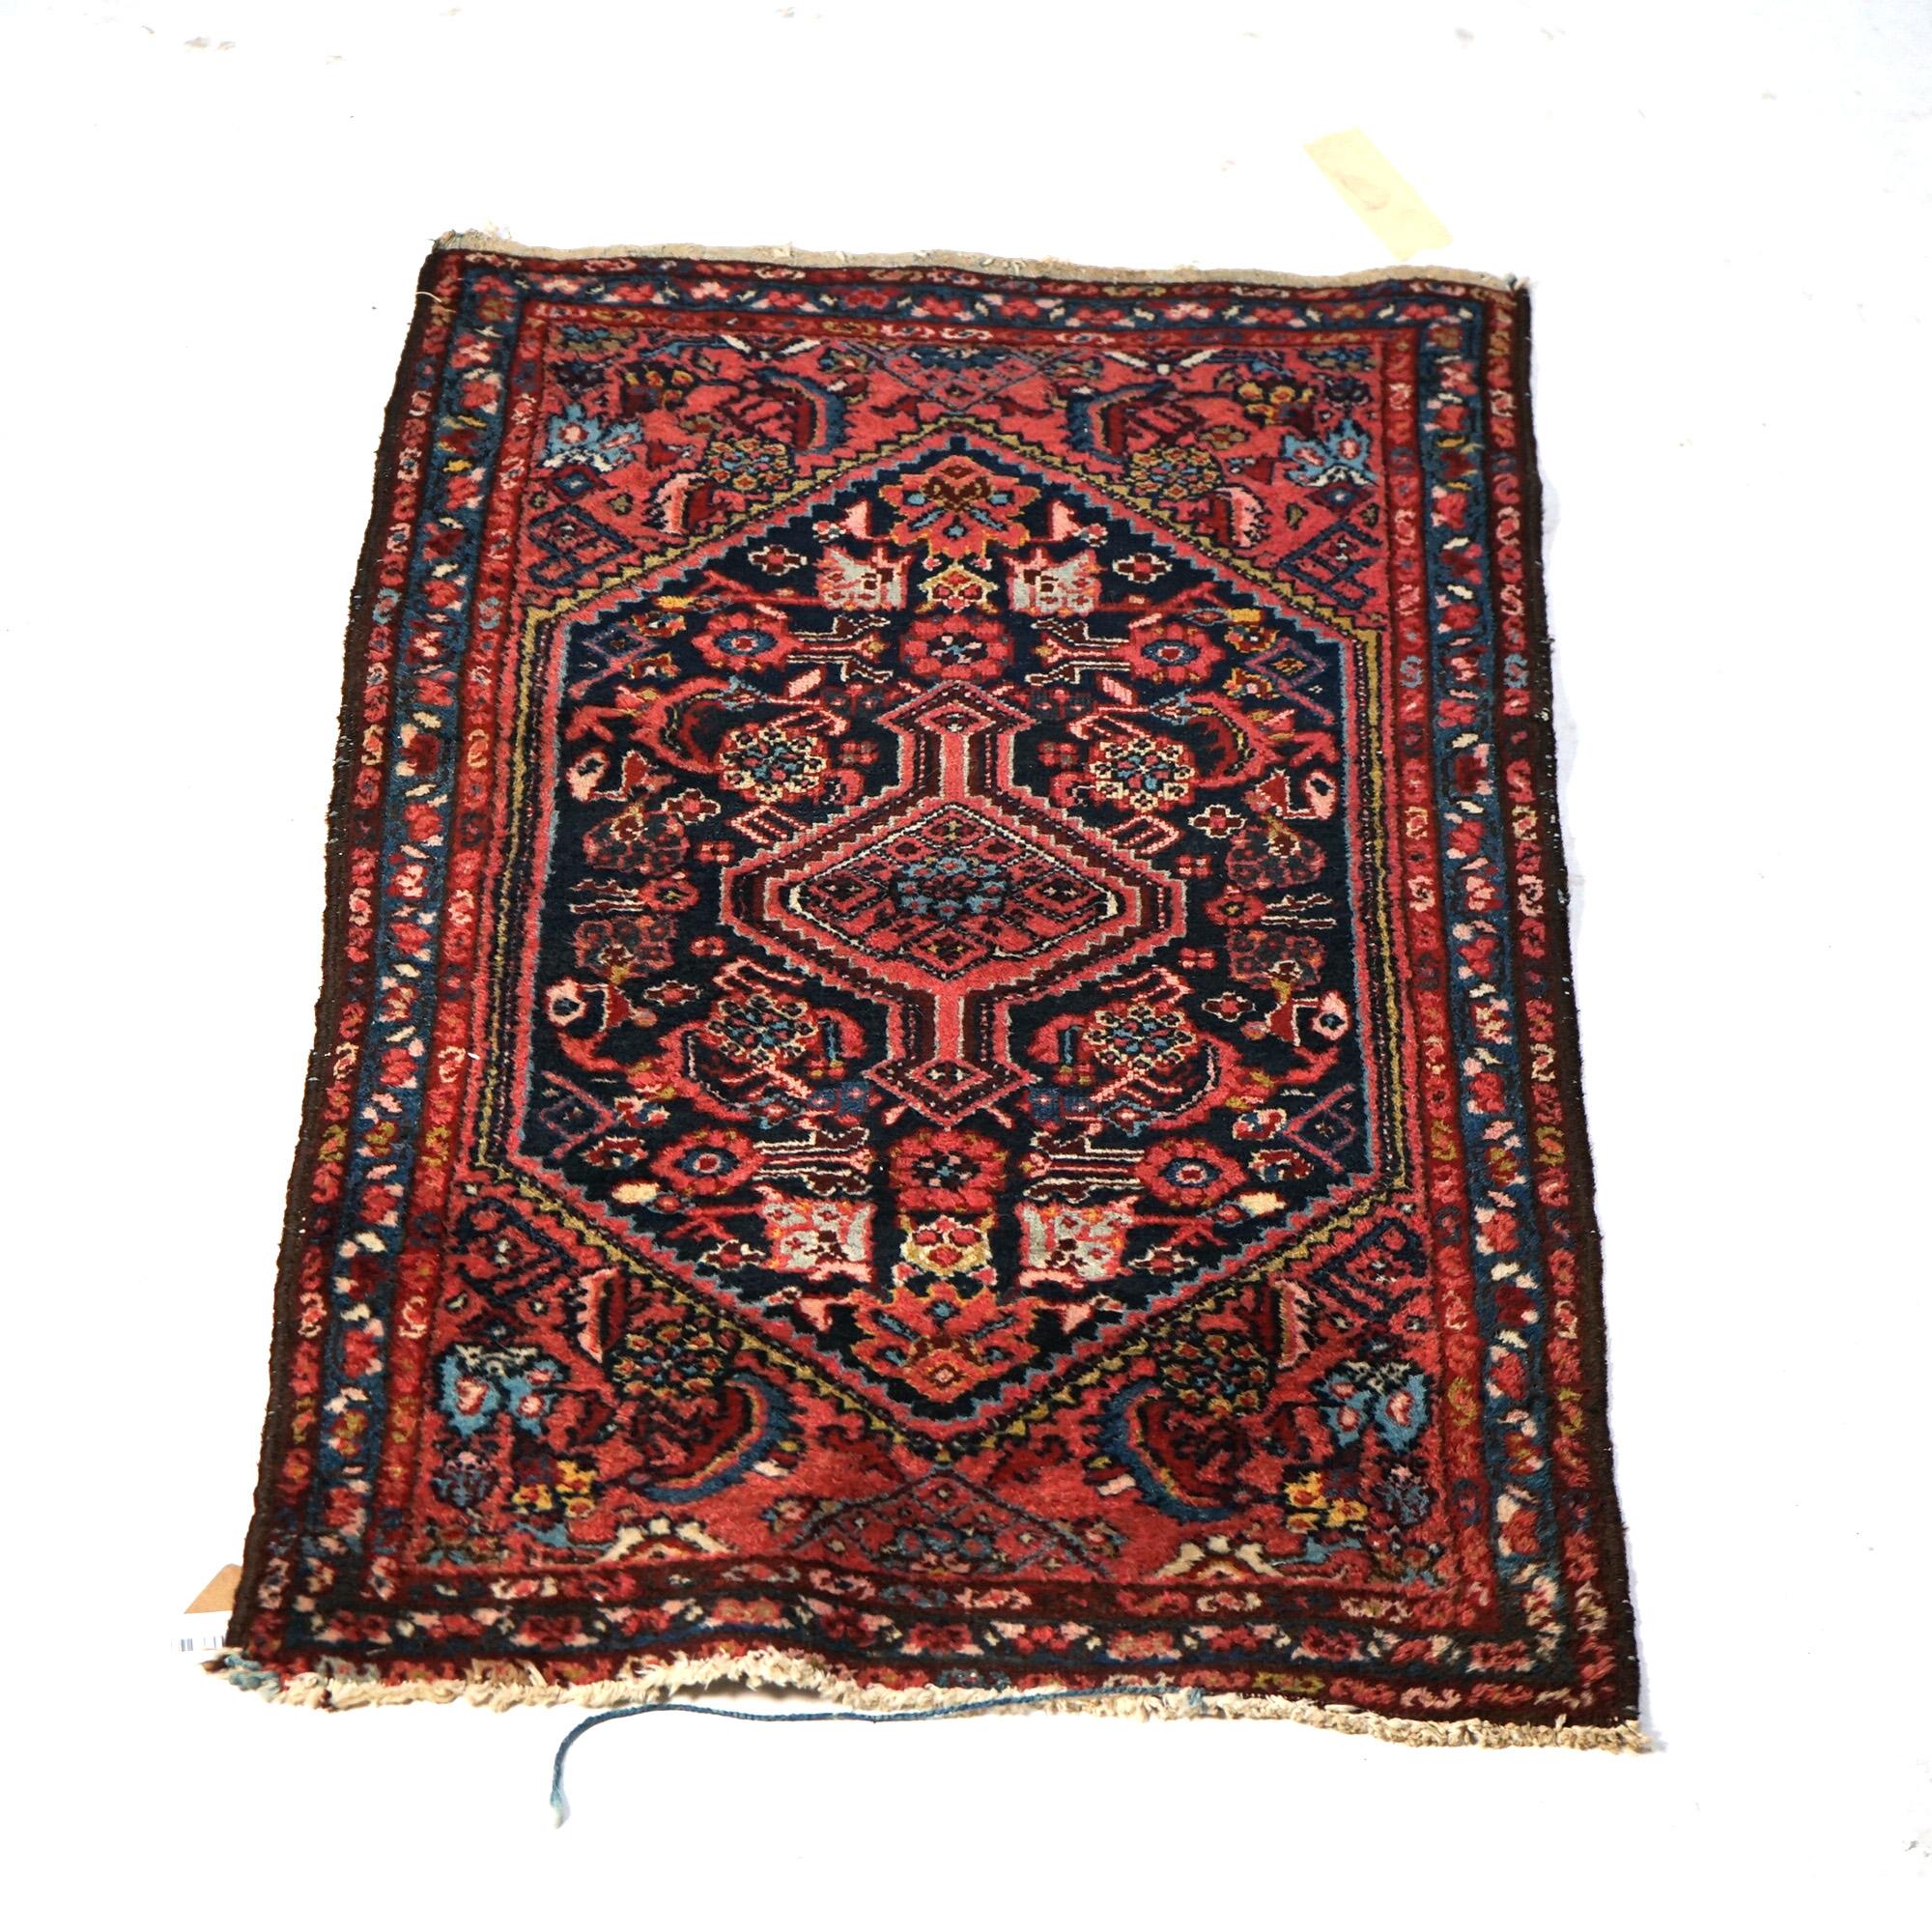 An antique Malayar oriental throw rug offers wool construction with central medallion and stylized foliate elements, c1920

Measures - 48